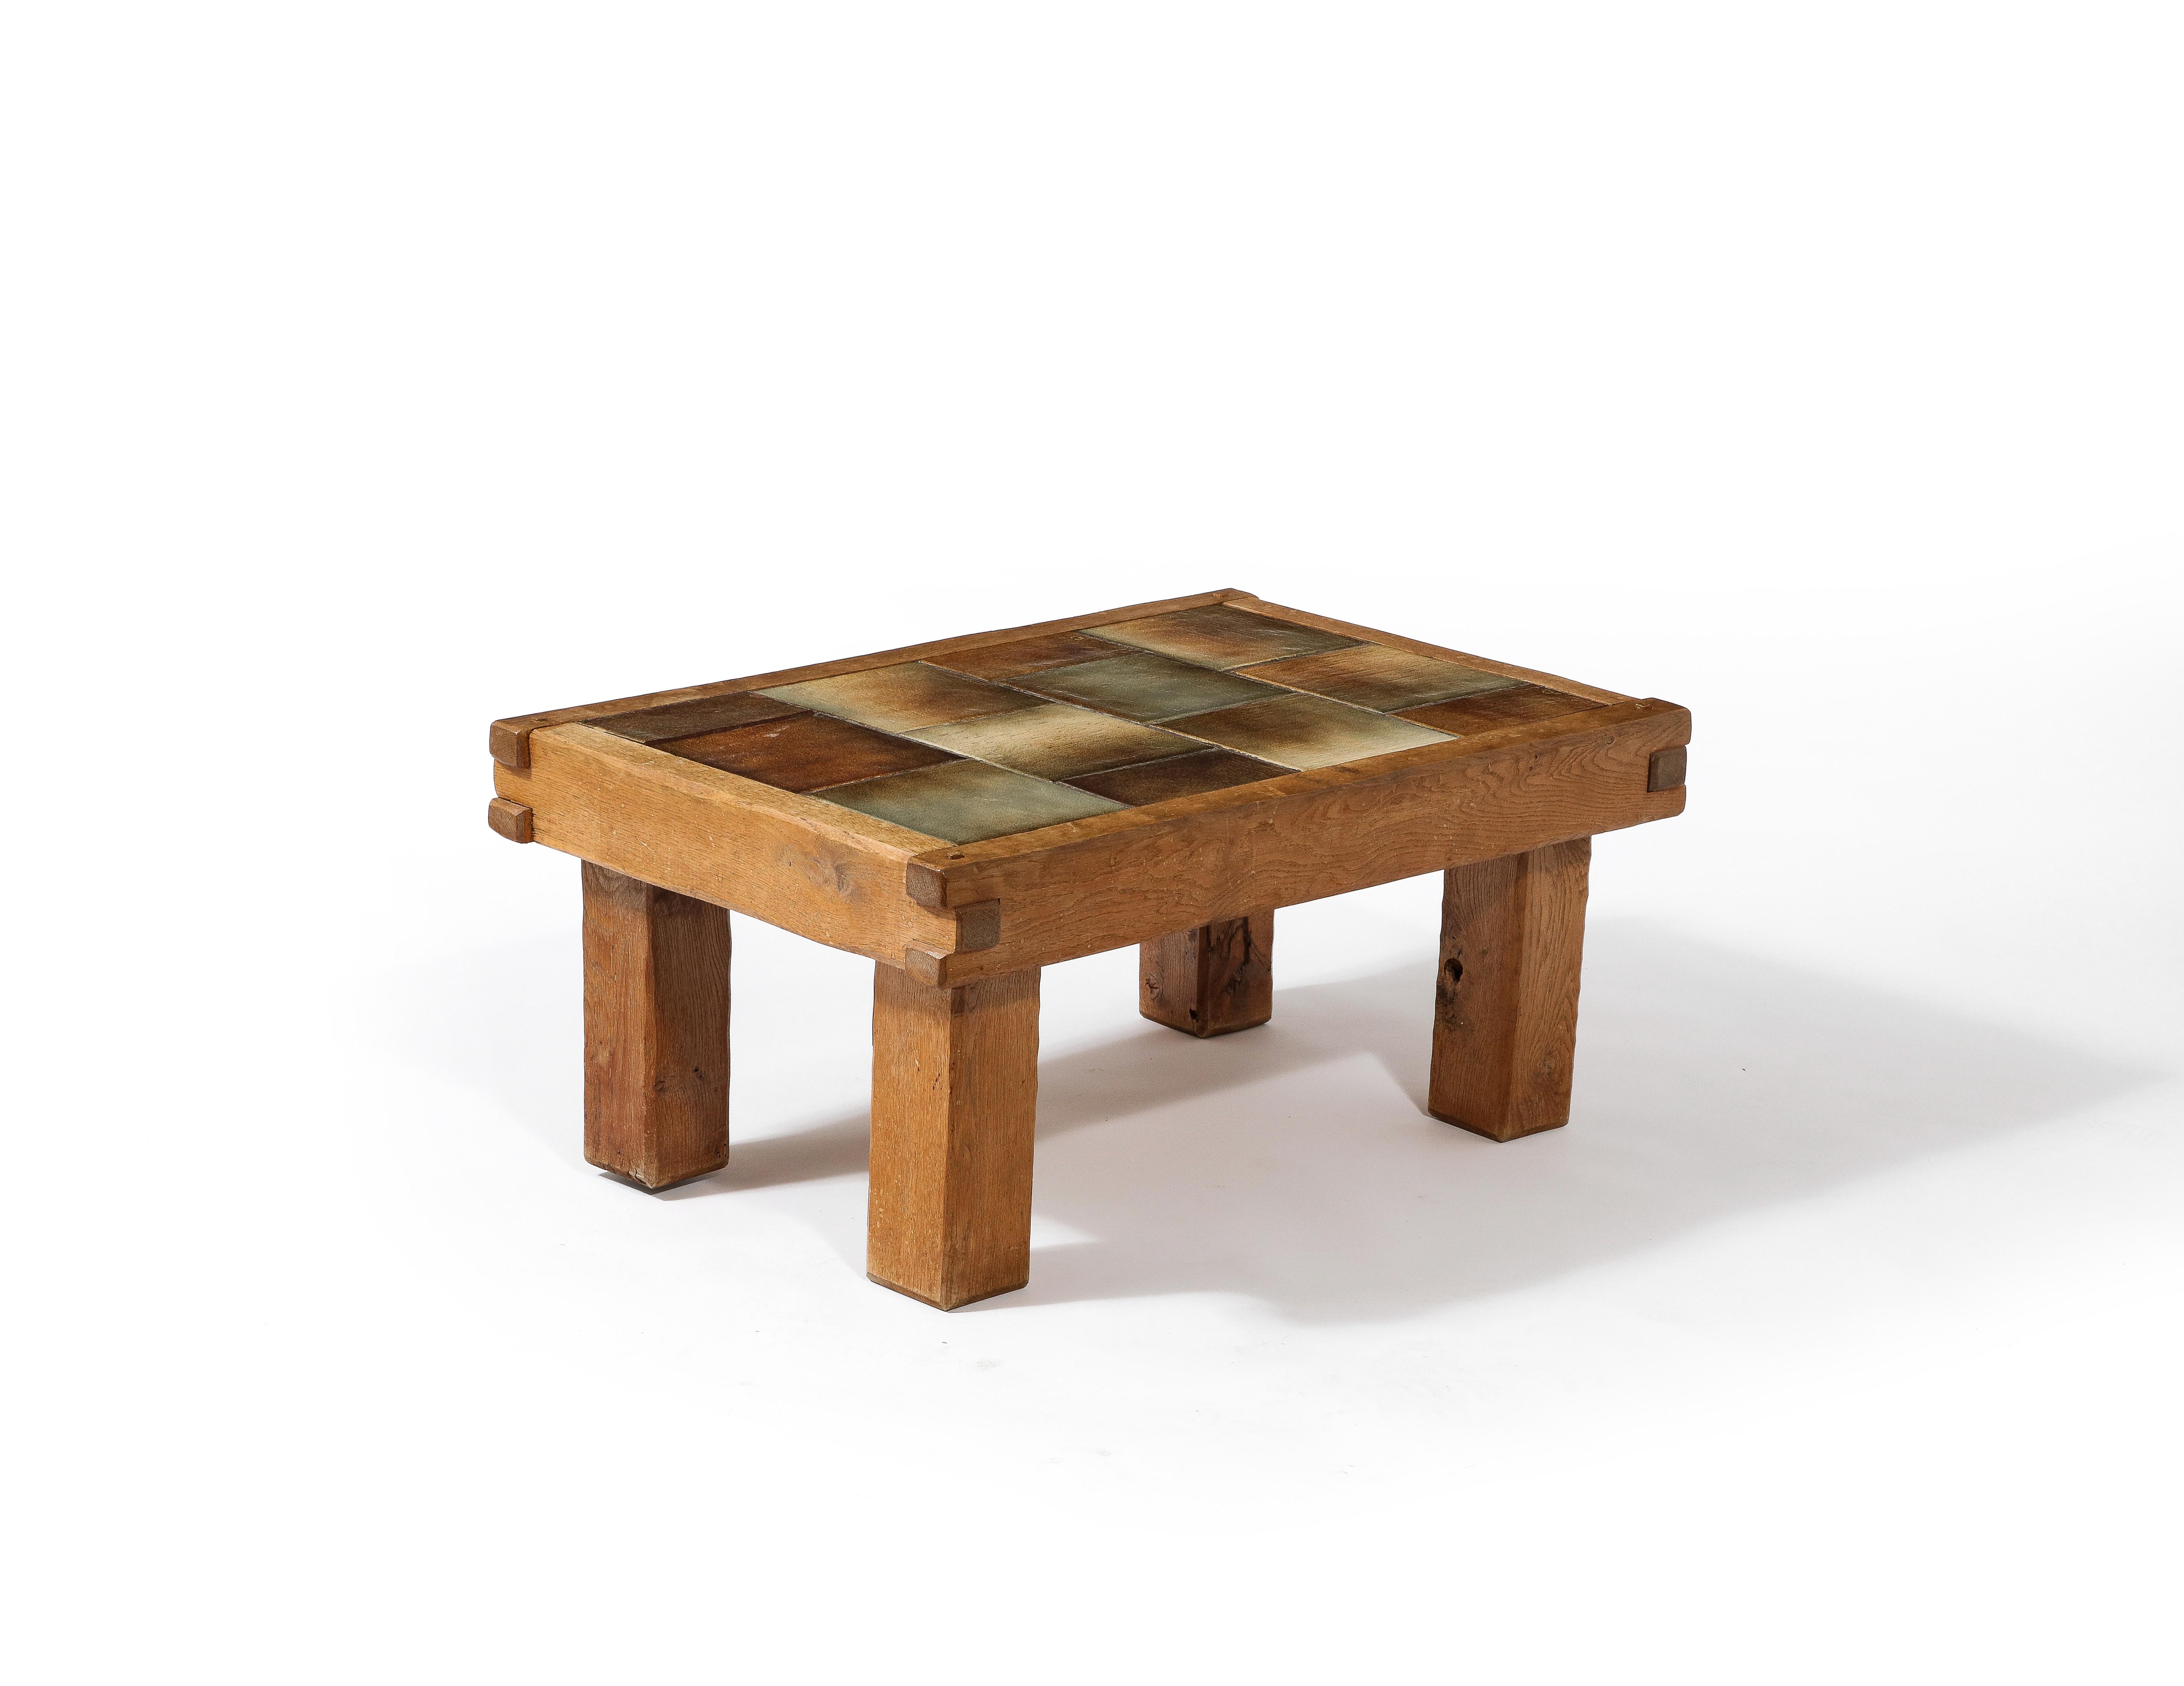 Small Brutalist Coffee Table with Ceramic Tile Top & Oak, France 1960's For Sale 3